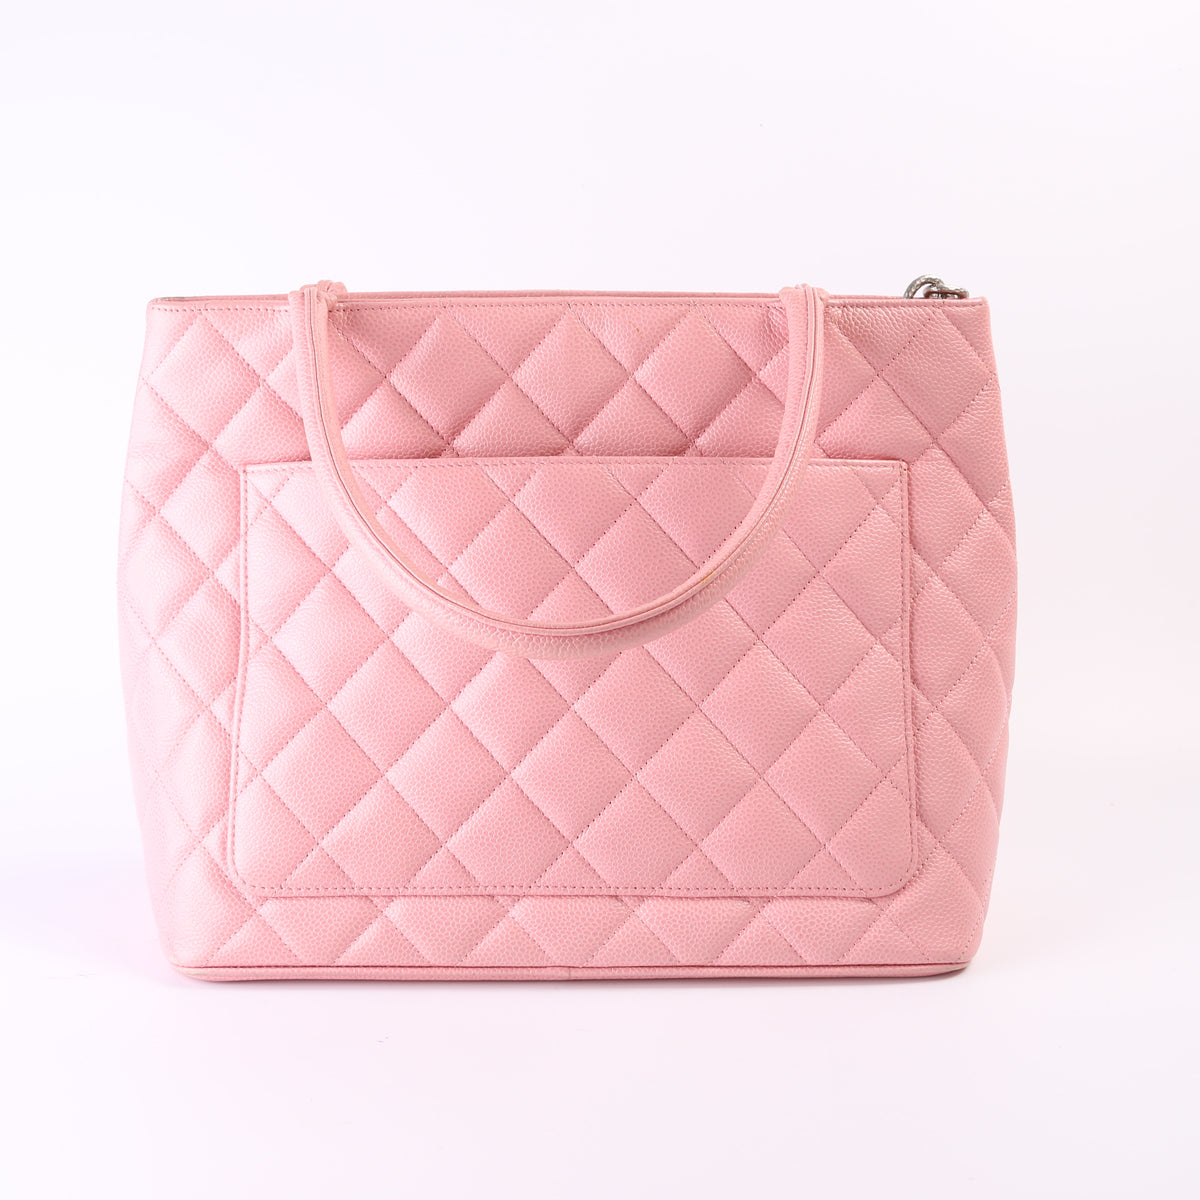 Chanel Quilted Medallion Tote Cavier Leather